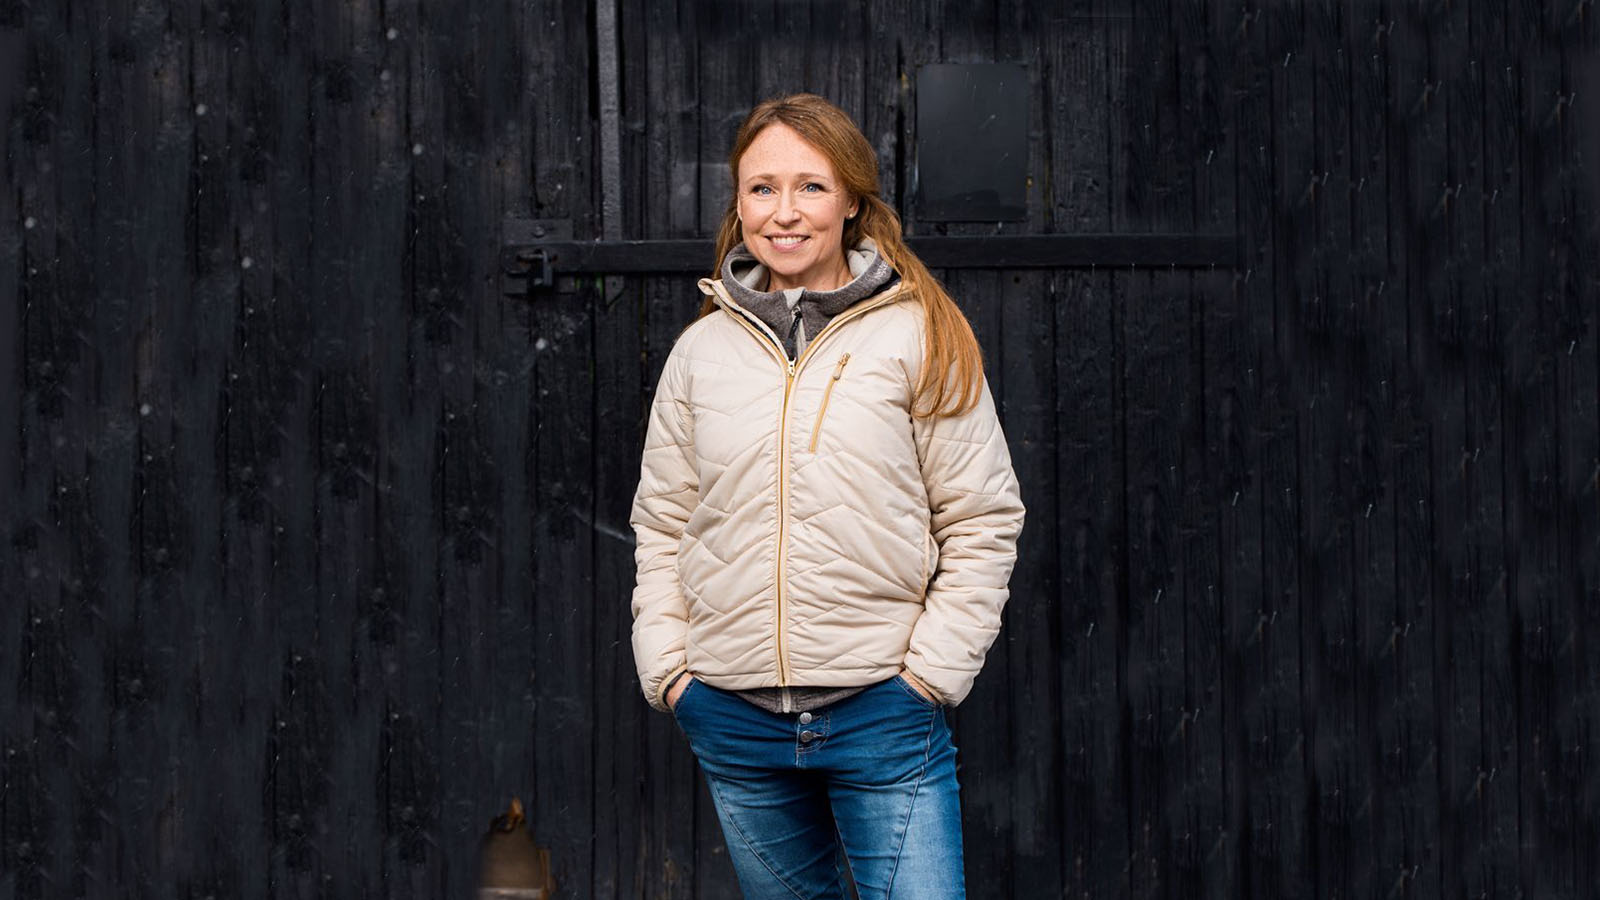 Maria Frykman has been appointed Chair of Scandinavian Outdoor Group